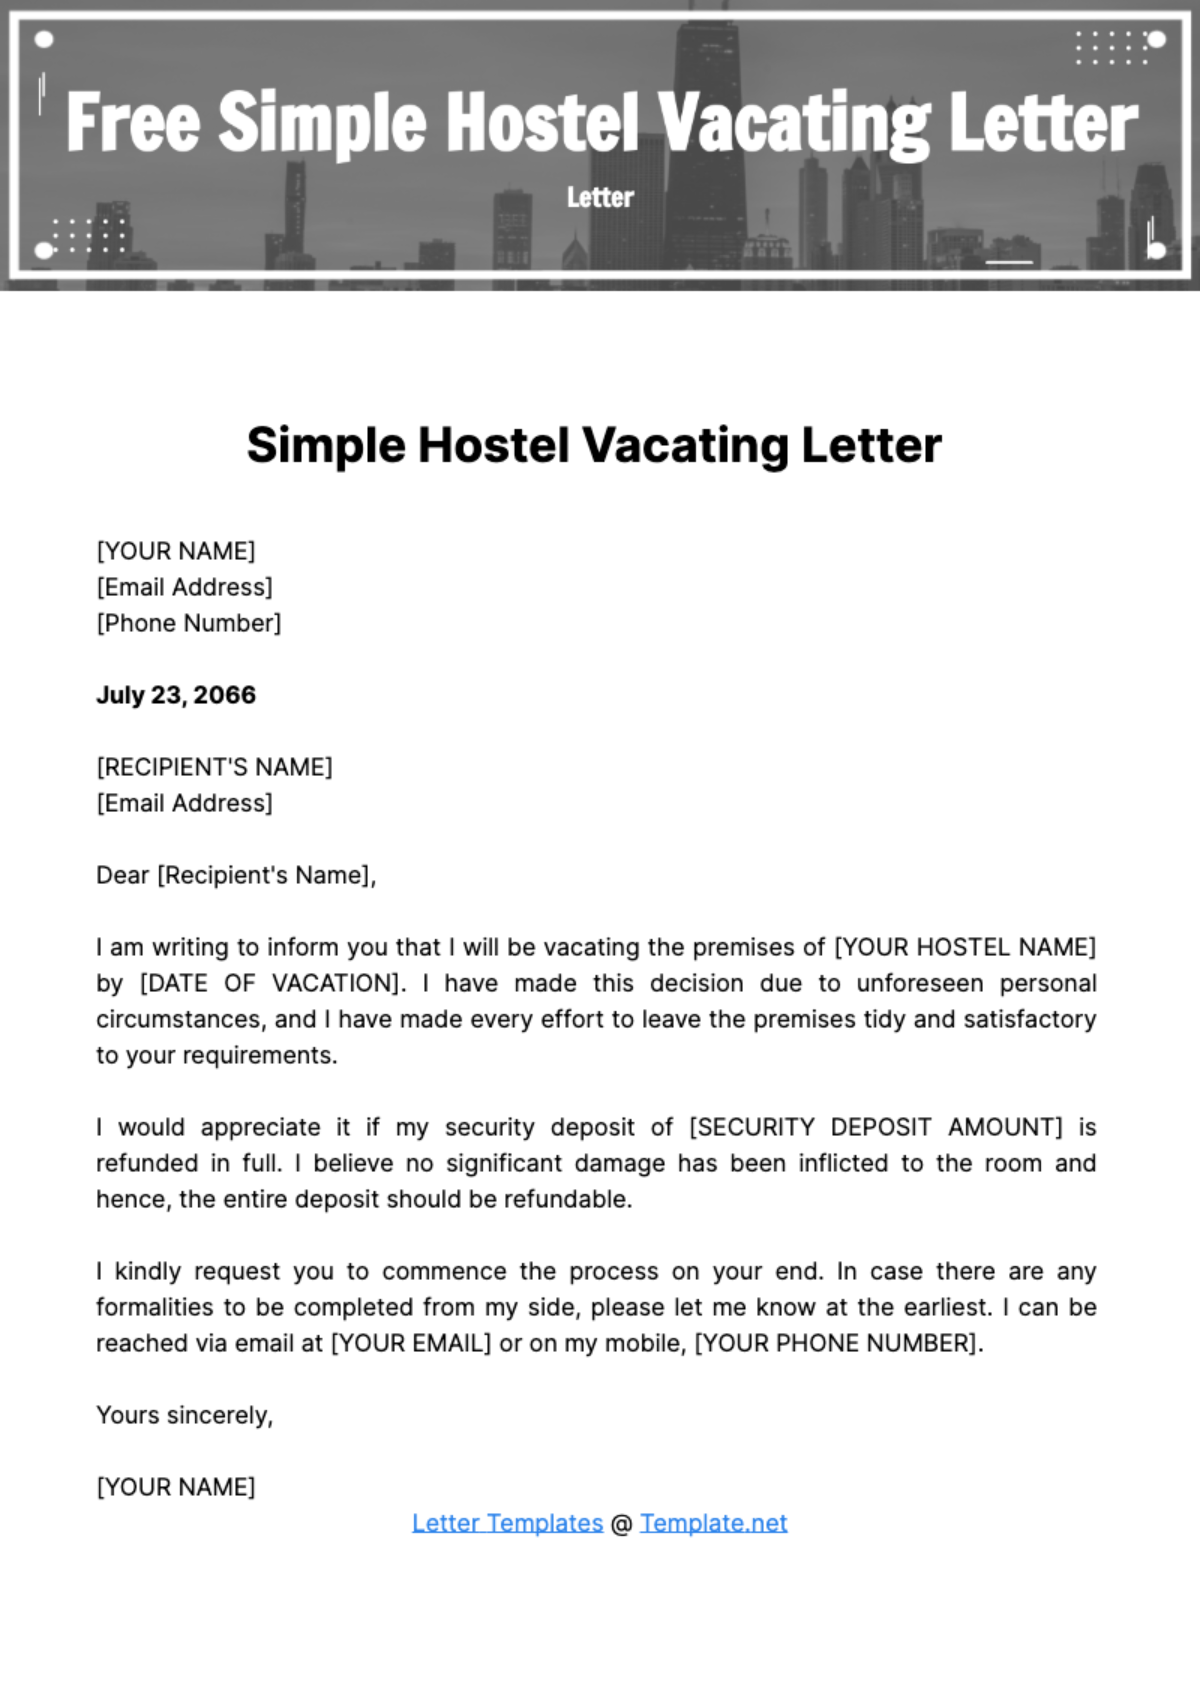 Simple Hostel Vacating Letter Template